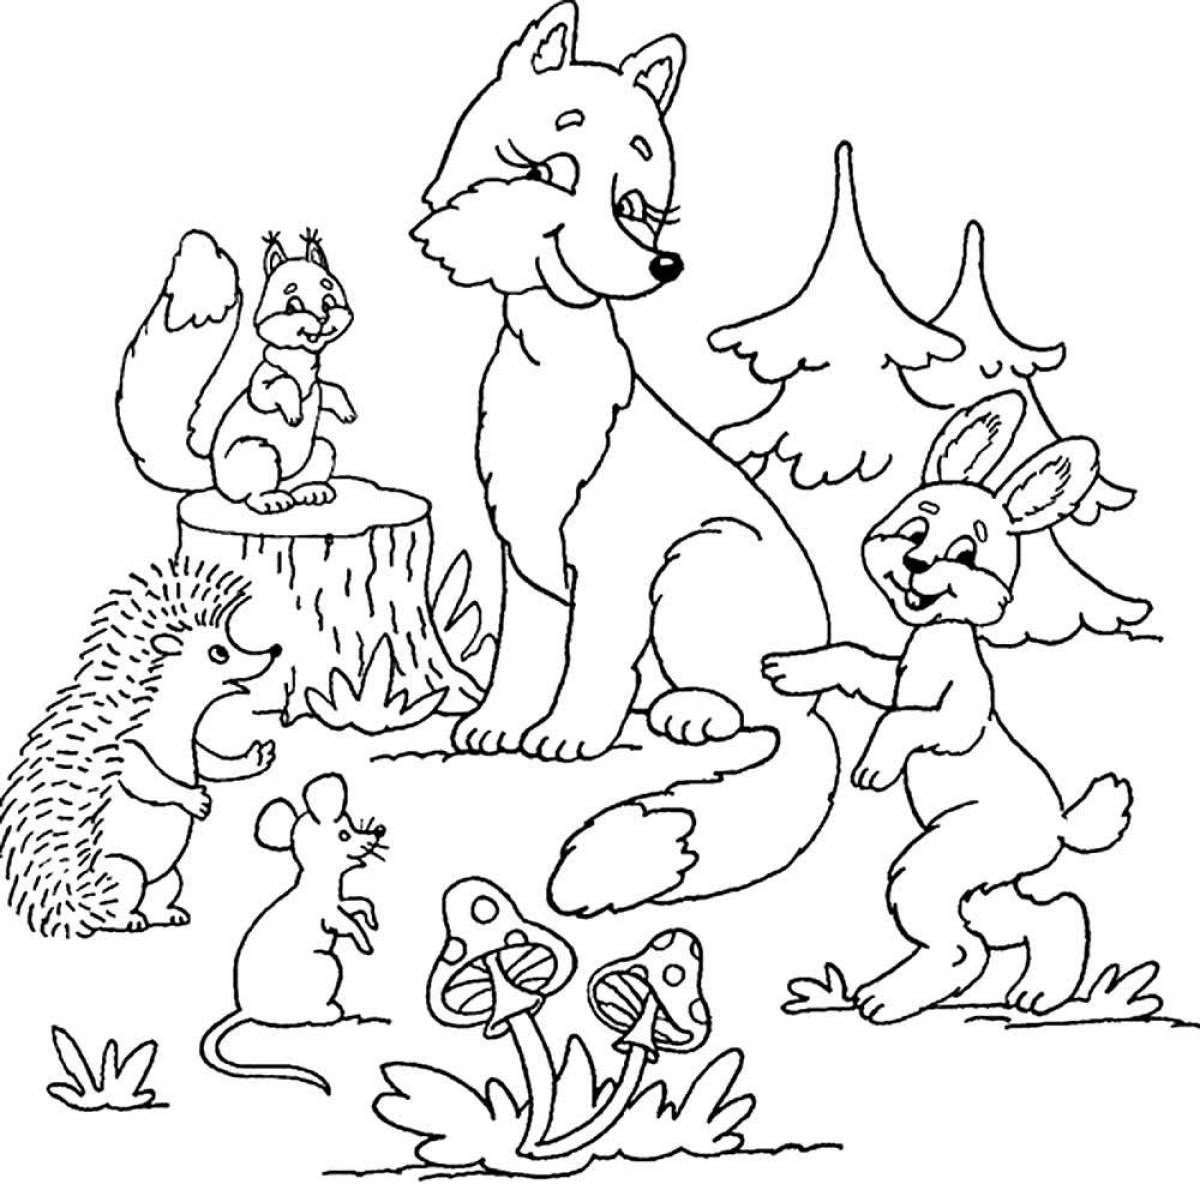 Fun coloring pages of wild animals for children 6-7 years old